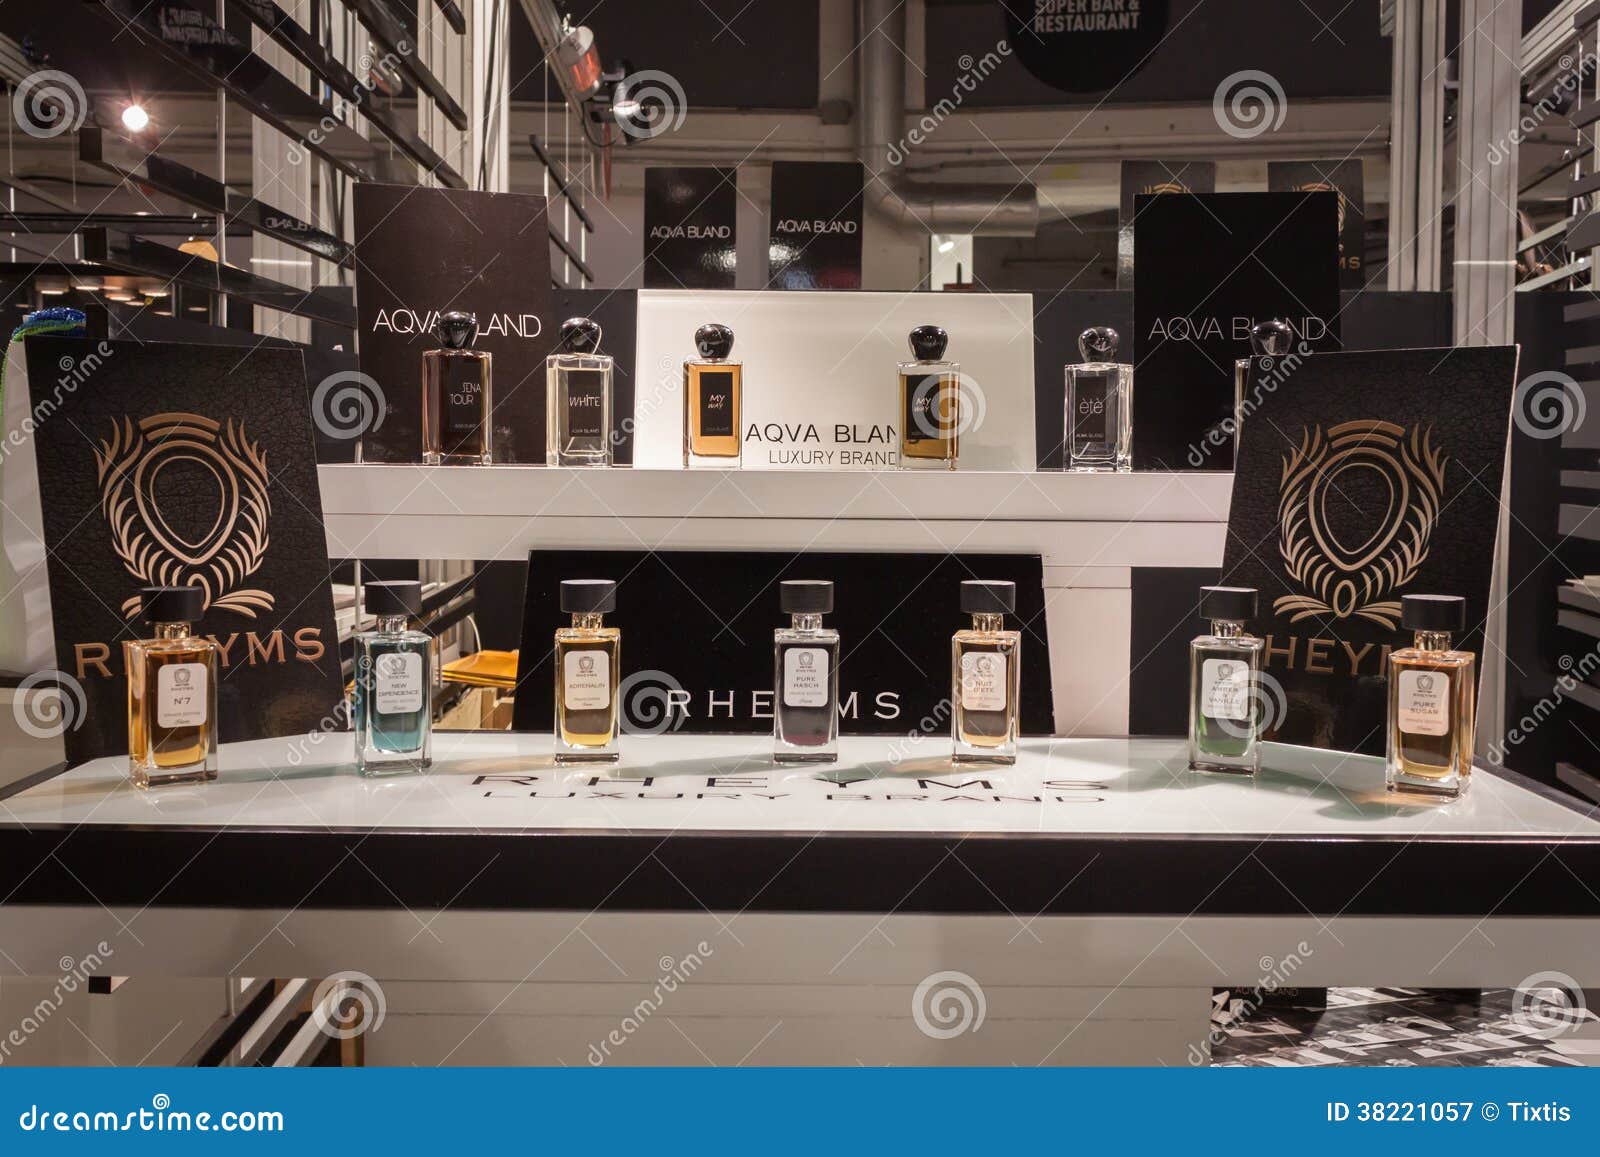 Perfume Bottles on Display at Mipap Trade Show in Milan, Italy ...